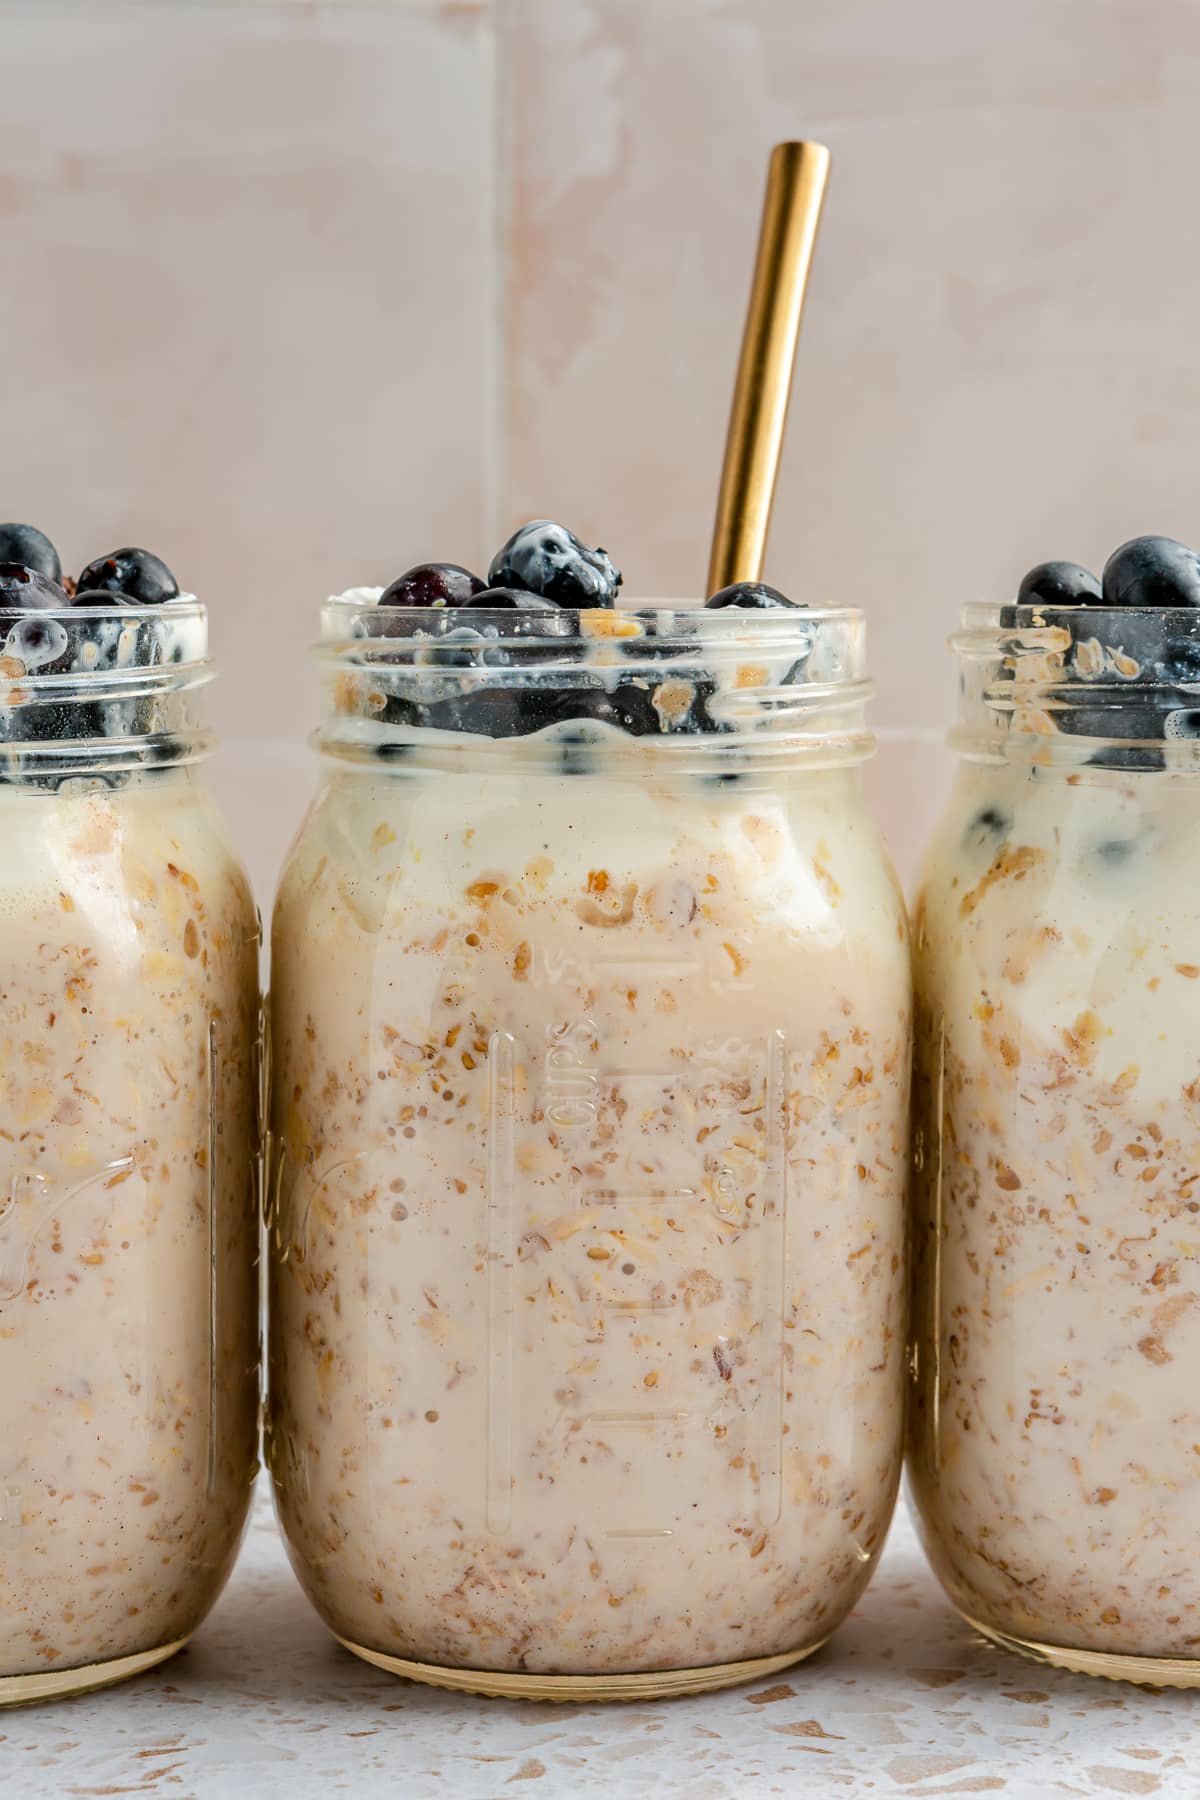 3 mason jars, full of high protein overnight oats, have been topped with blueberries. They sit arranged in a line on a white speckled countertop. A gold-colored spoon has been added to one of the jars.